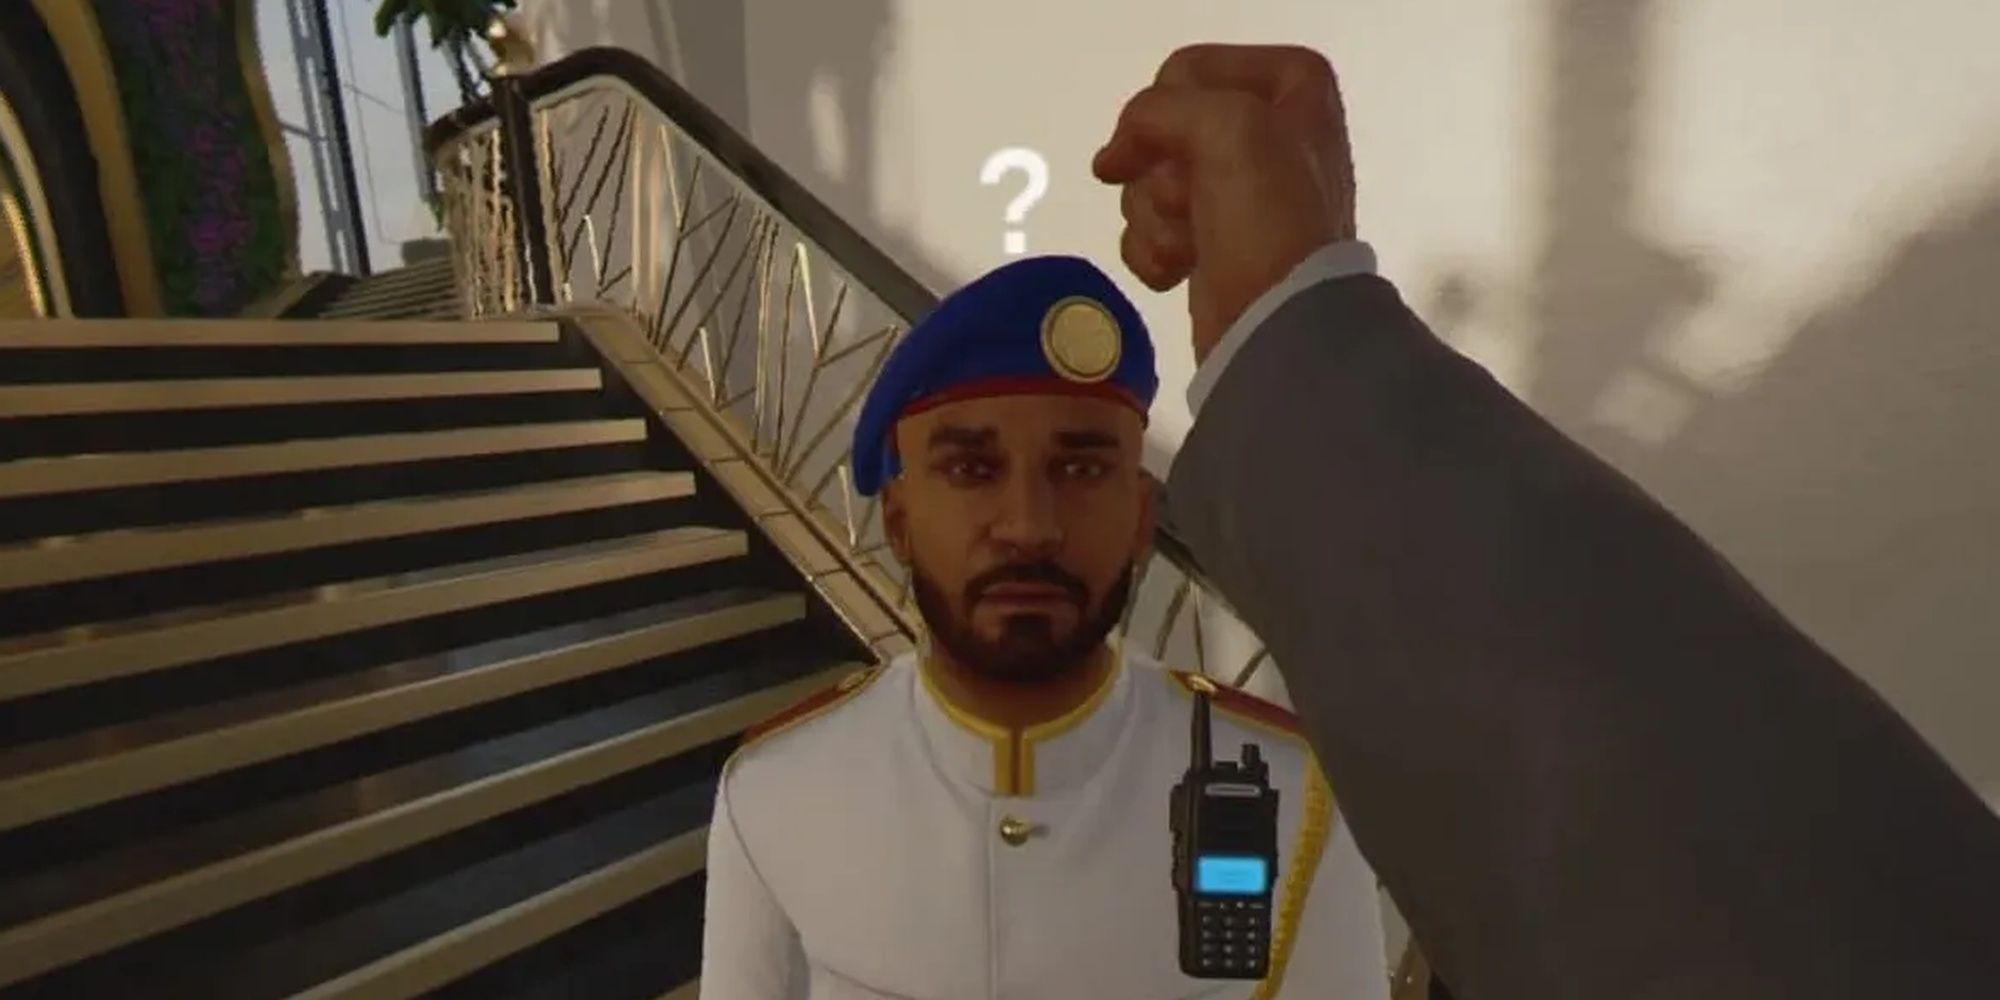 Hitman 3 VR: Taking Out A Suspicious Guard With Melee 